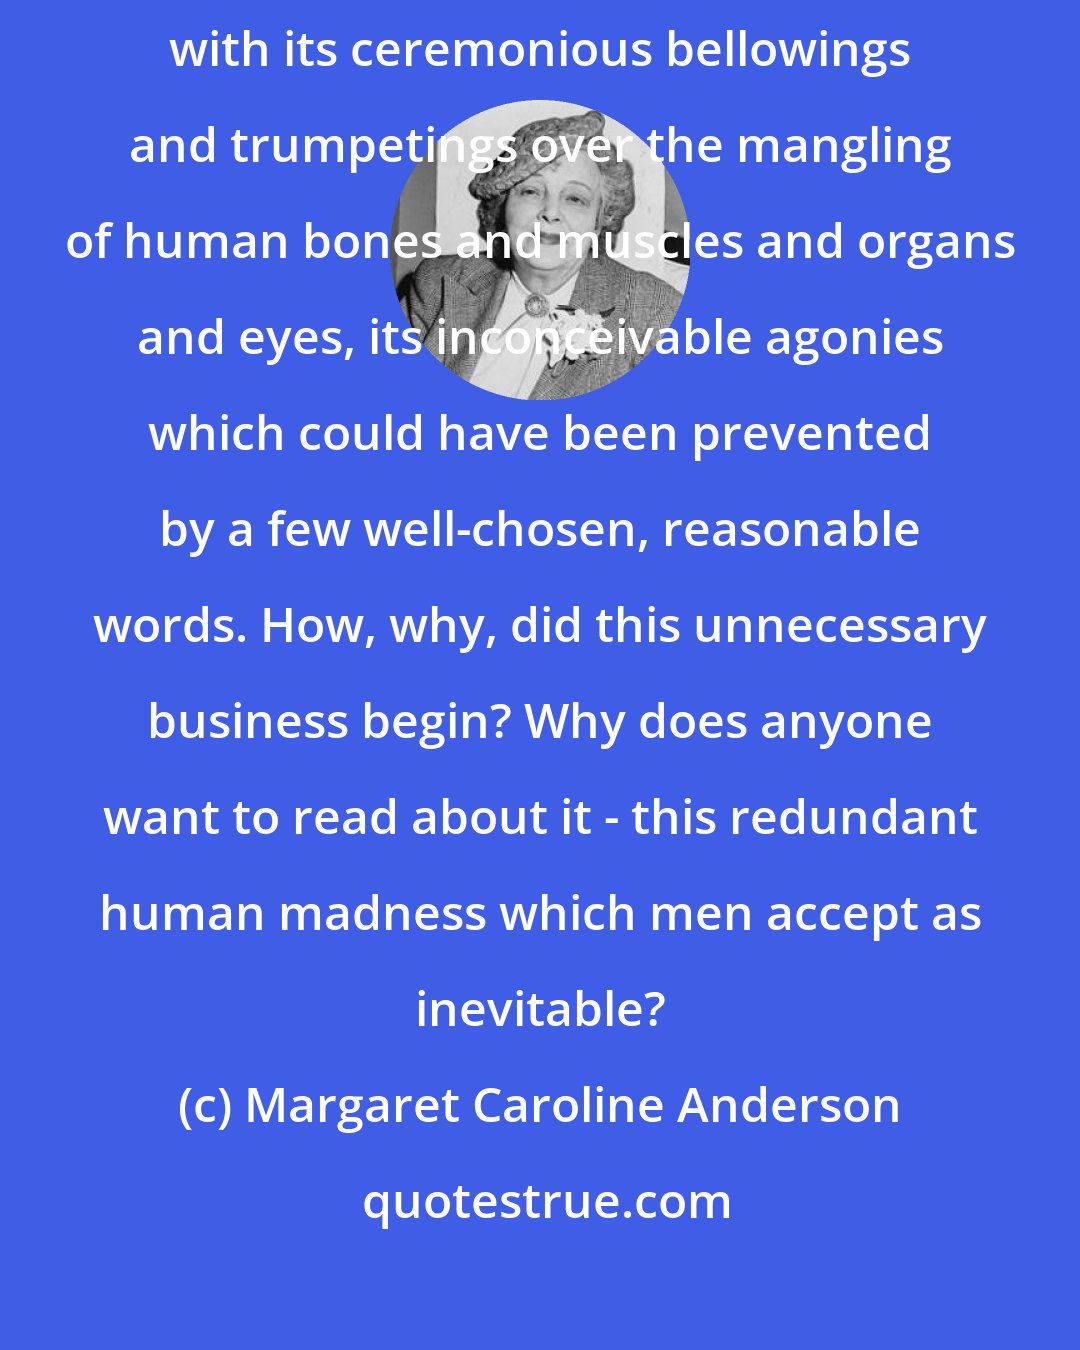 Margaret Caroline Anderson: How can anyone be interested in war? - that glorious pursuit of annihilation with its ceremonious bellowings and trumpetings over the mangling of human bones and muscles and organs and eyes, its inconceivable agonies which could have been prevented by a few well-chosen, reasonable words. How, why, did this unnecessary business begin? Why does anyone want to read about it - this redundant human madness which men accept as inevitable?